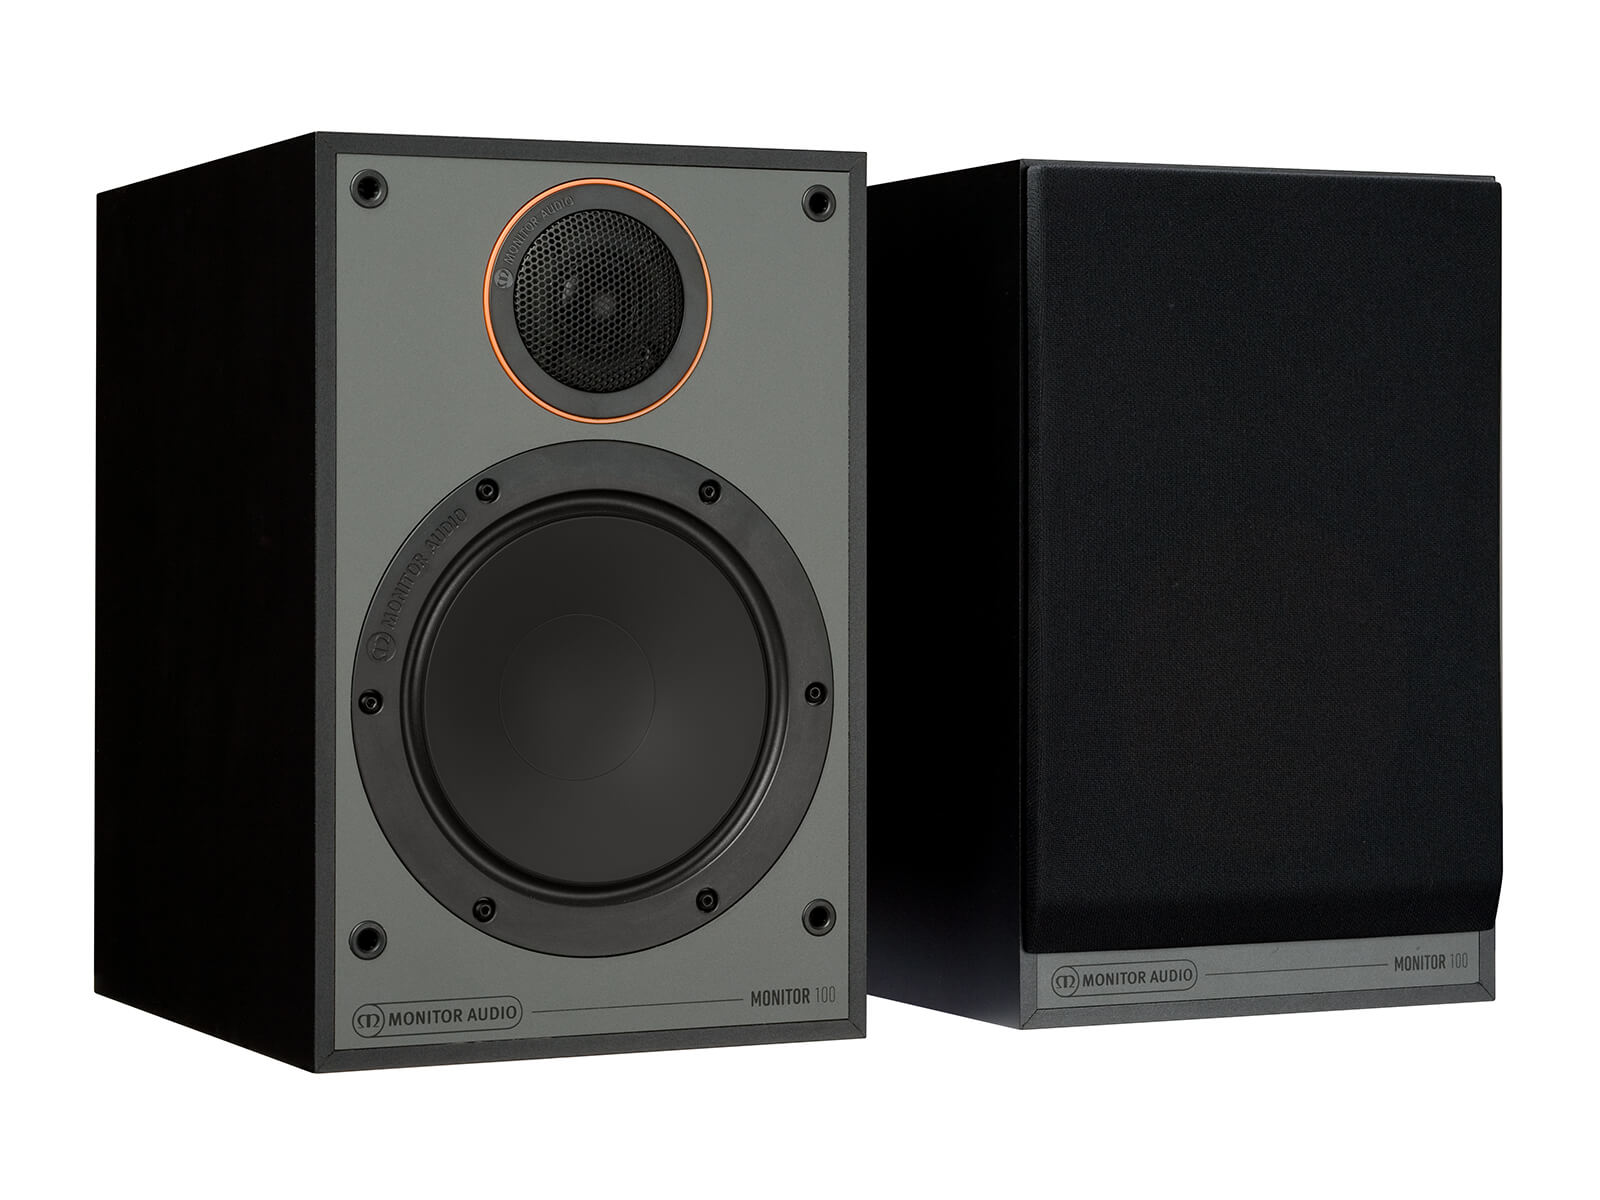 Monitor 100, bookshelf speakers, with and without grille in a black finish.